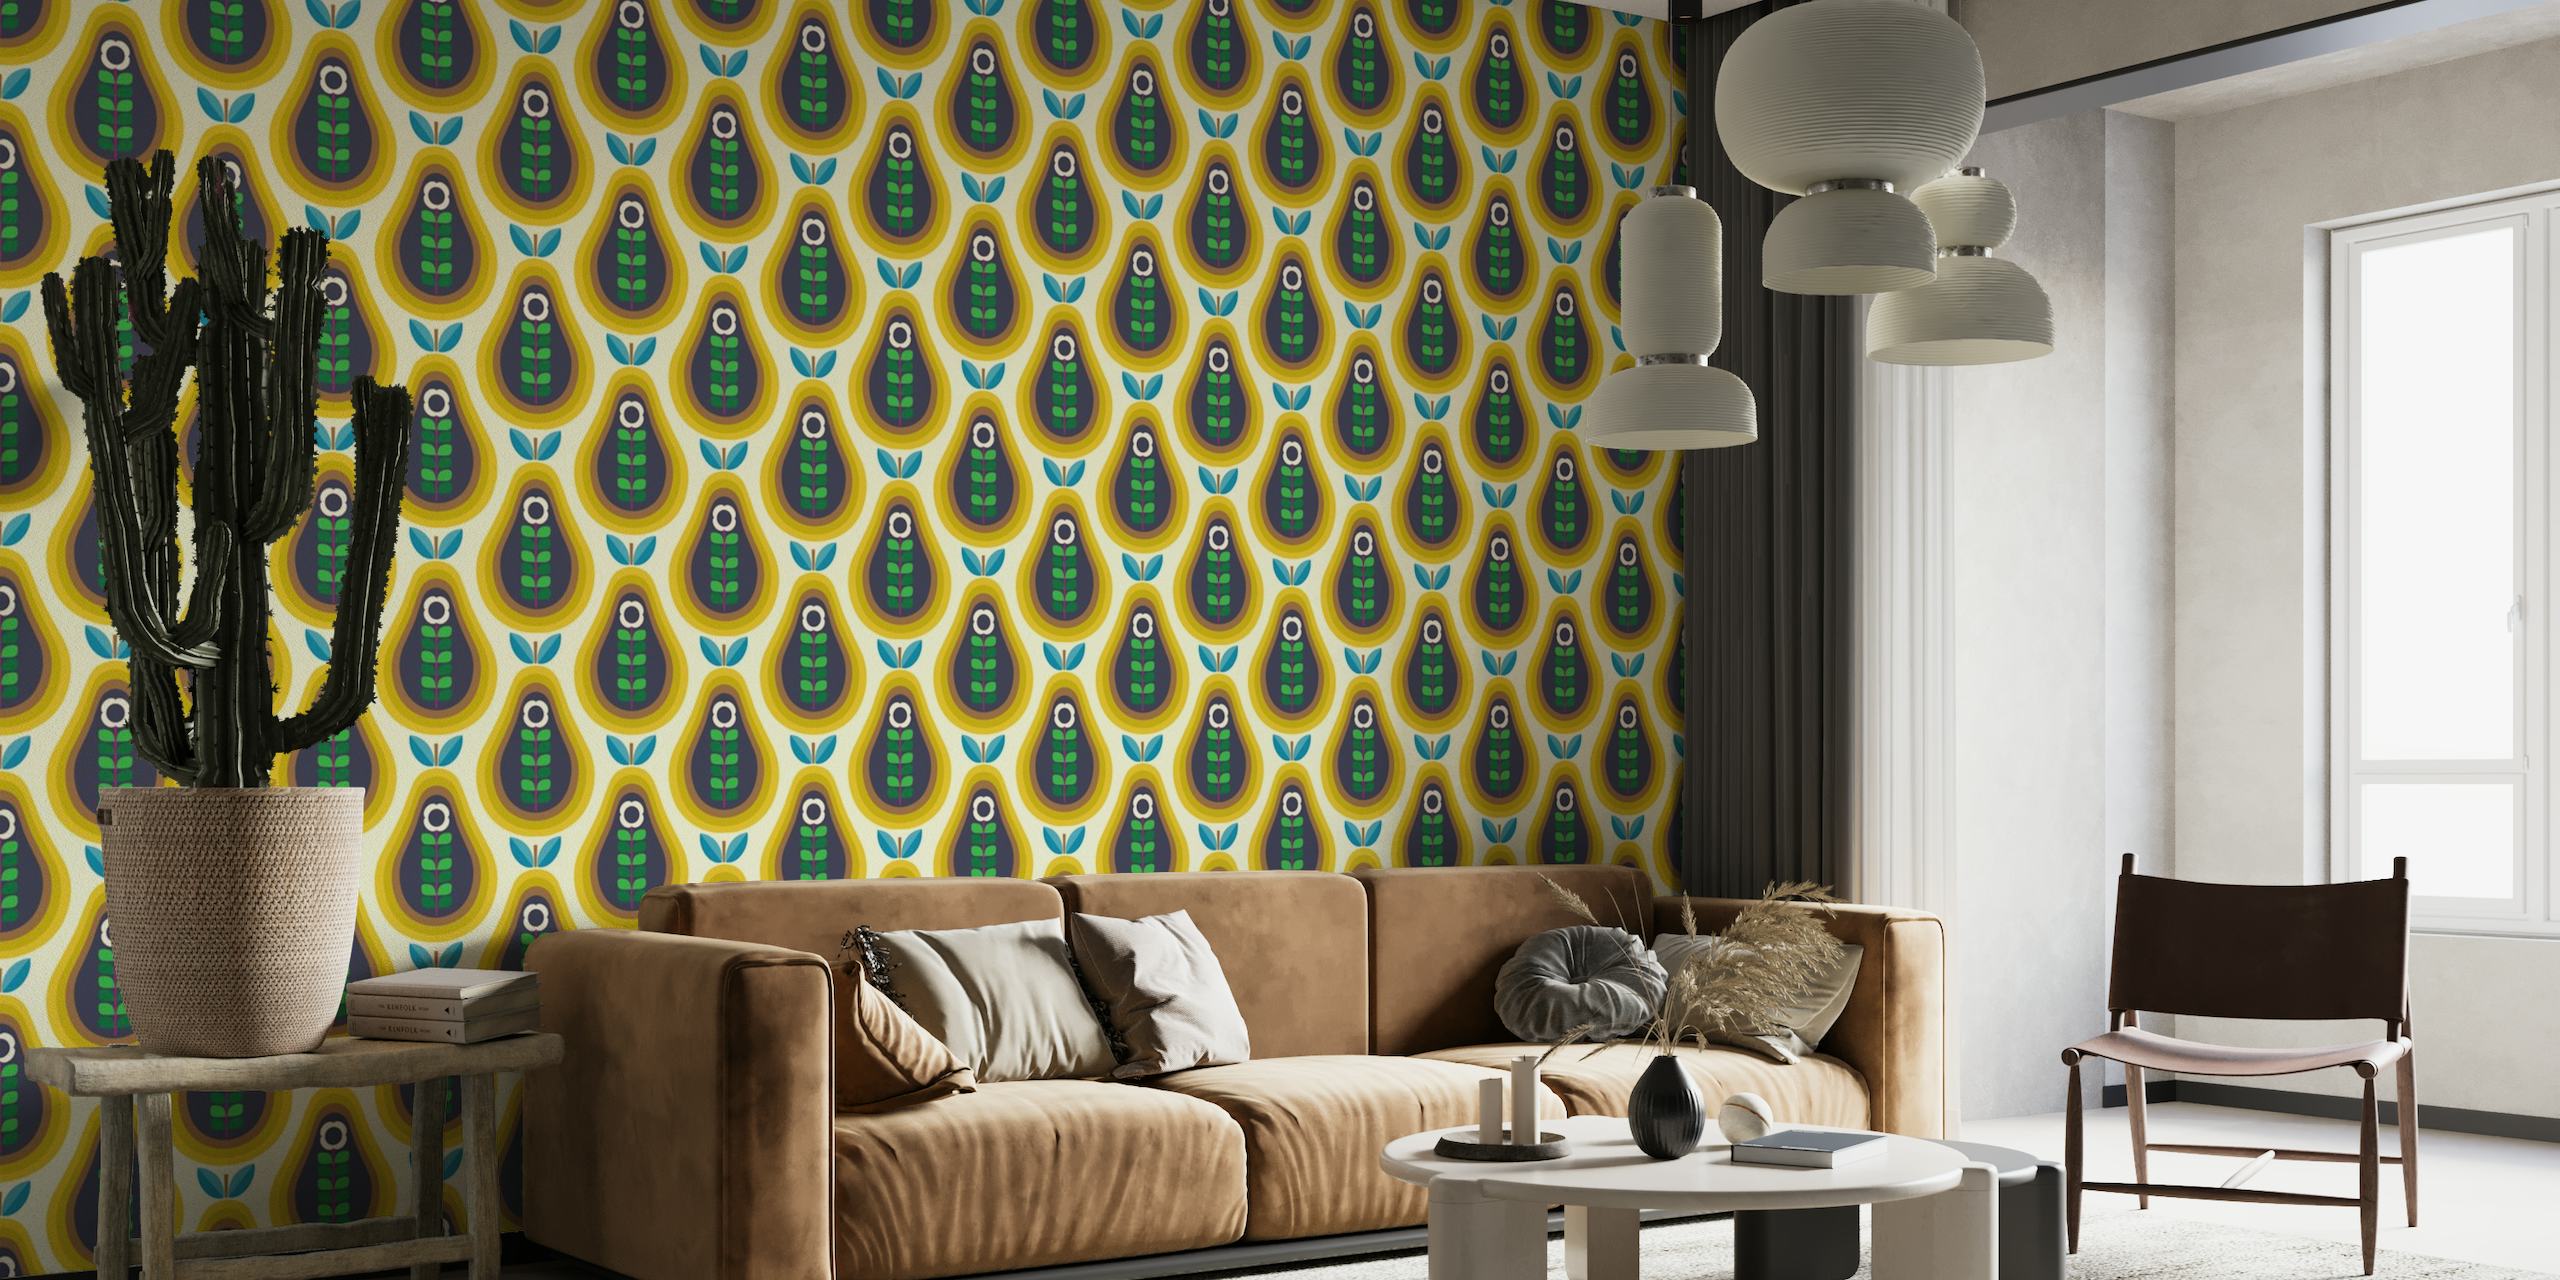 Stylized pear patterns wall mural from happywall.com